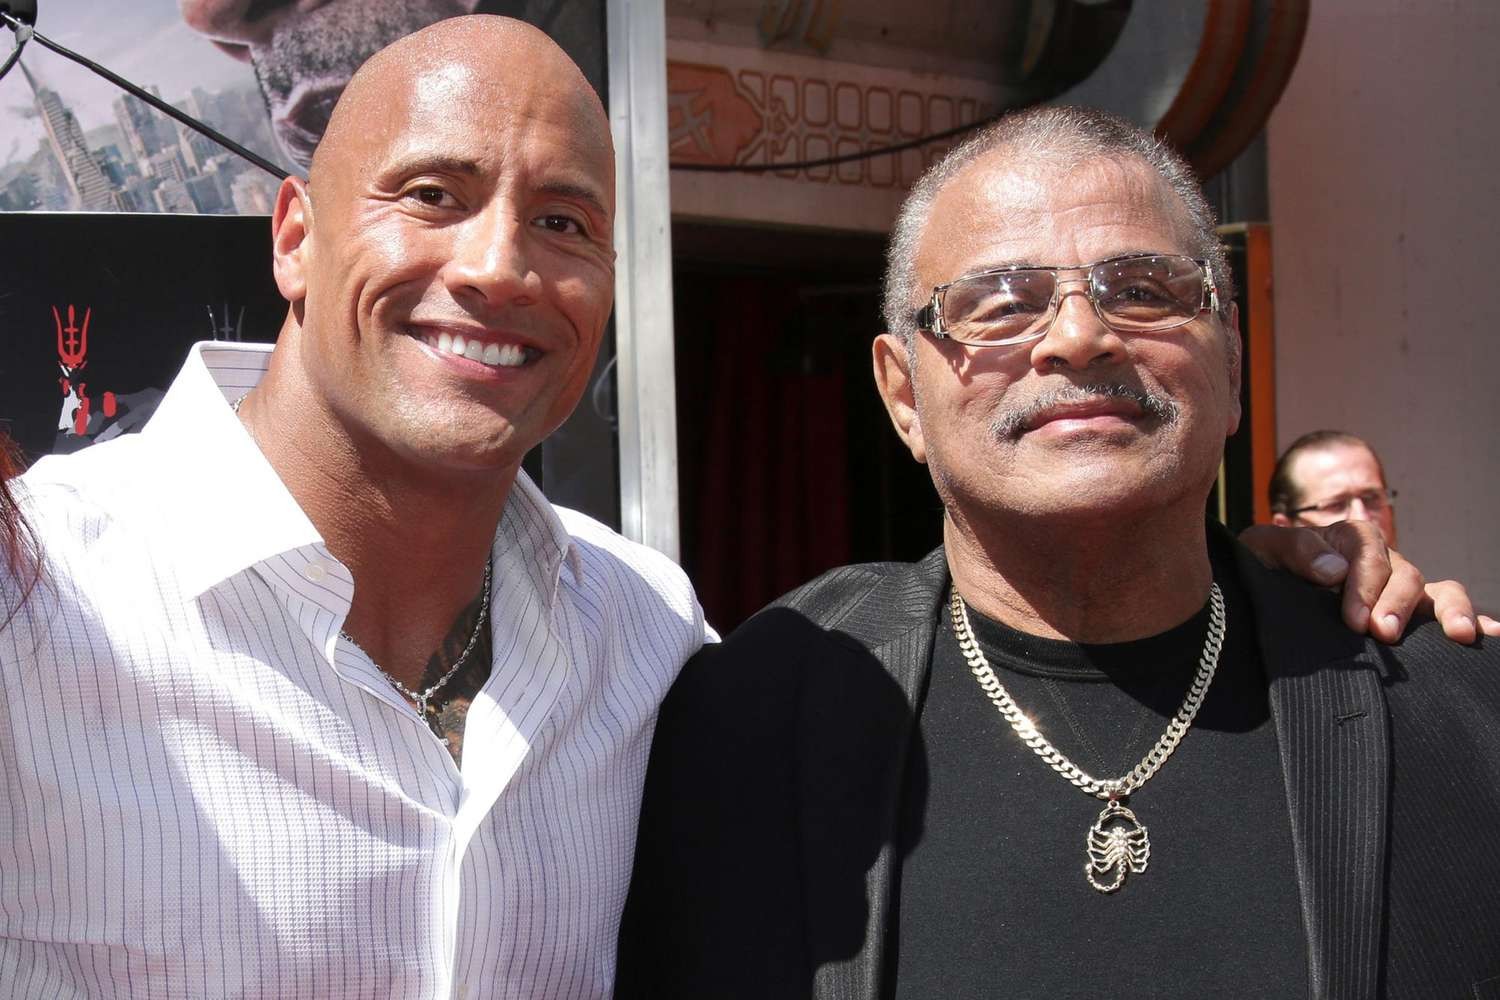 Dwayne Johnson with his father